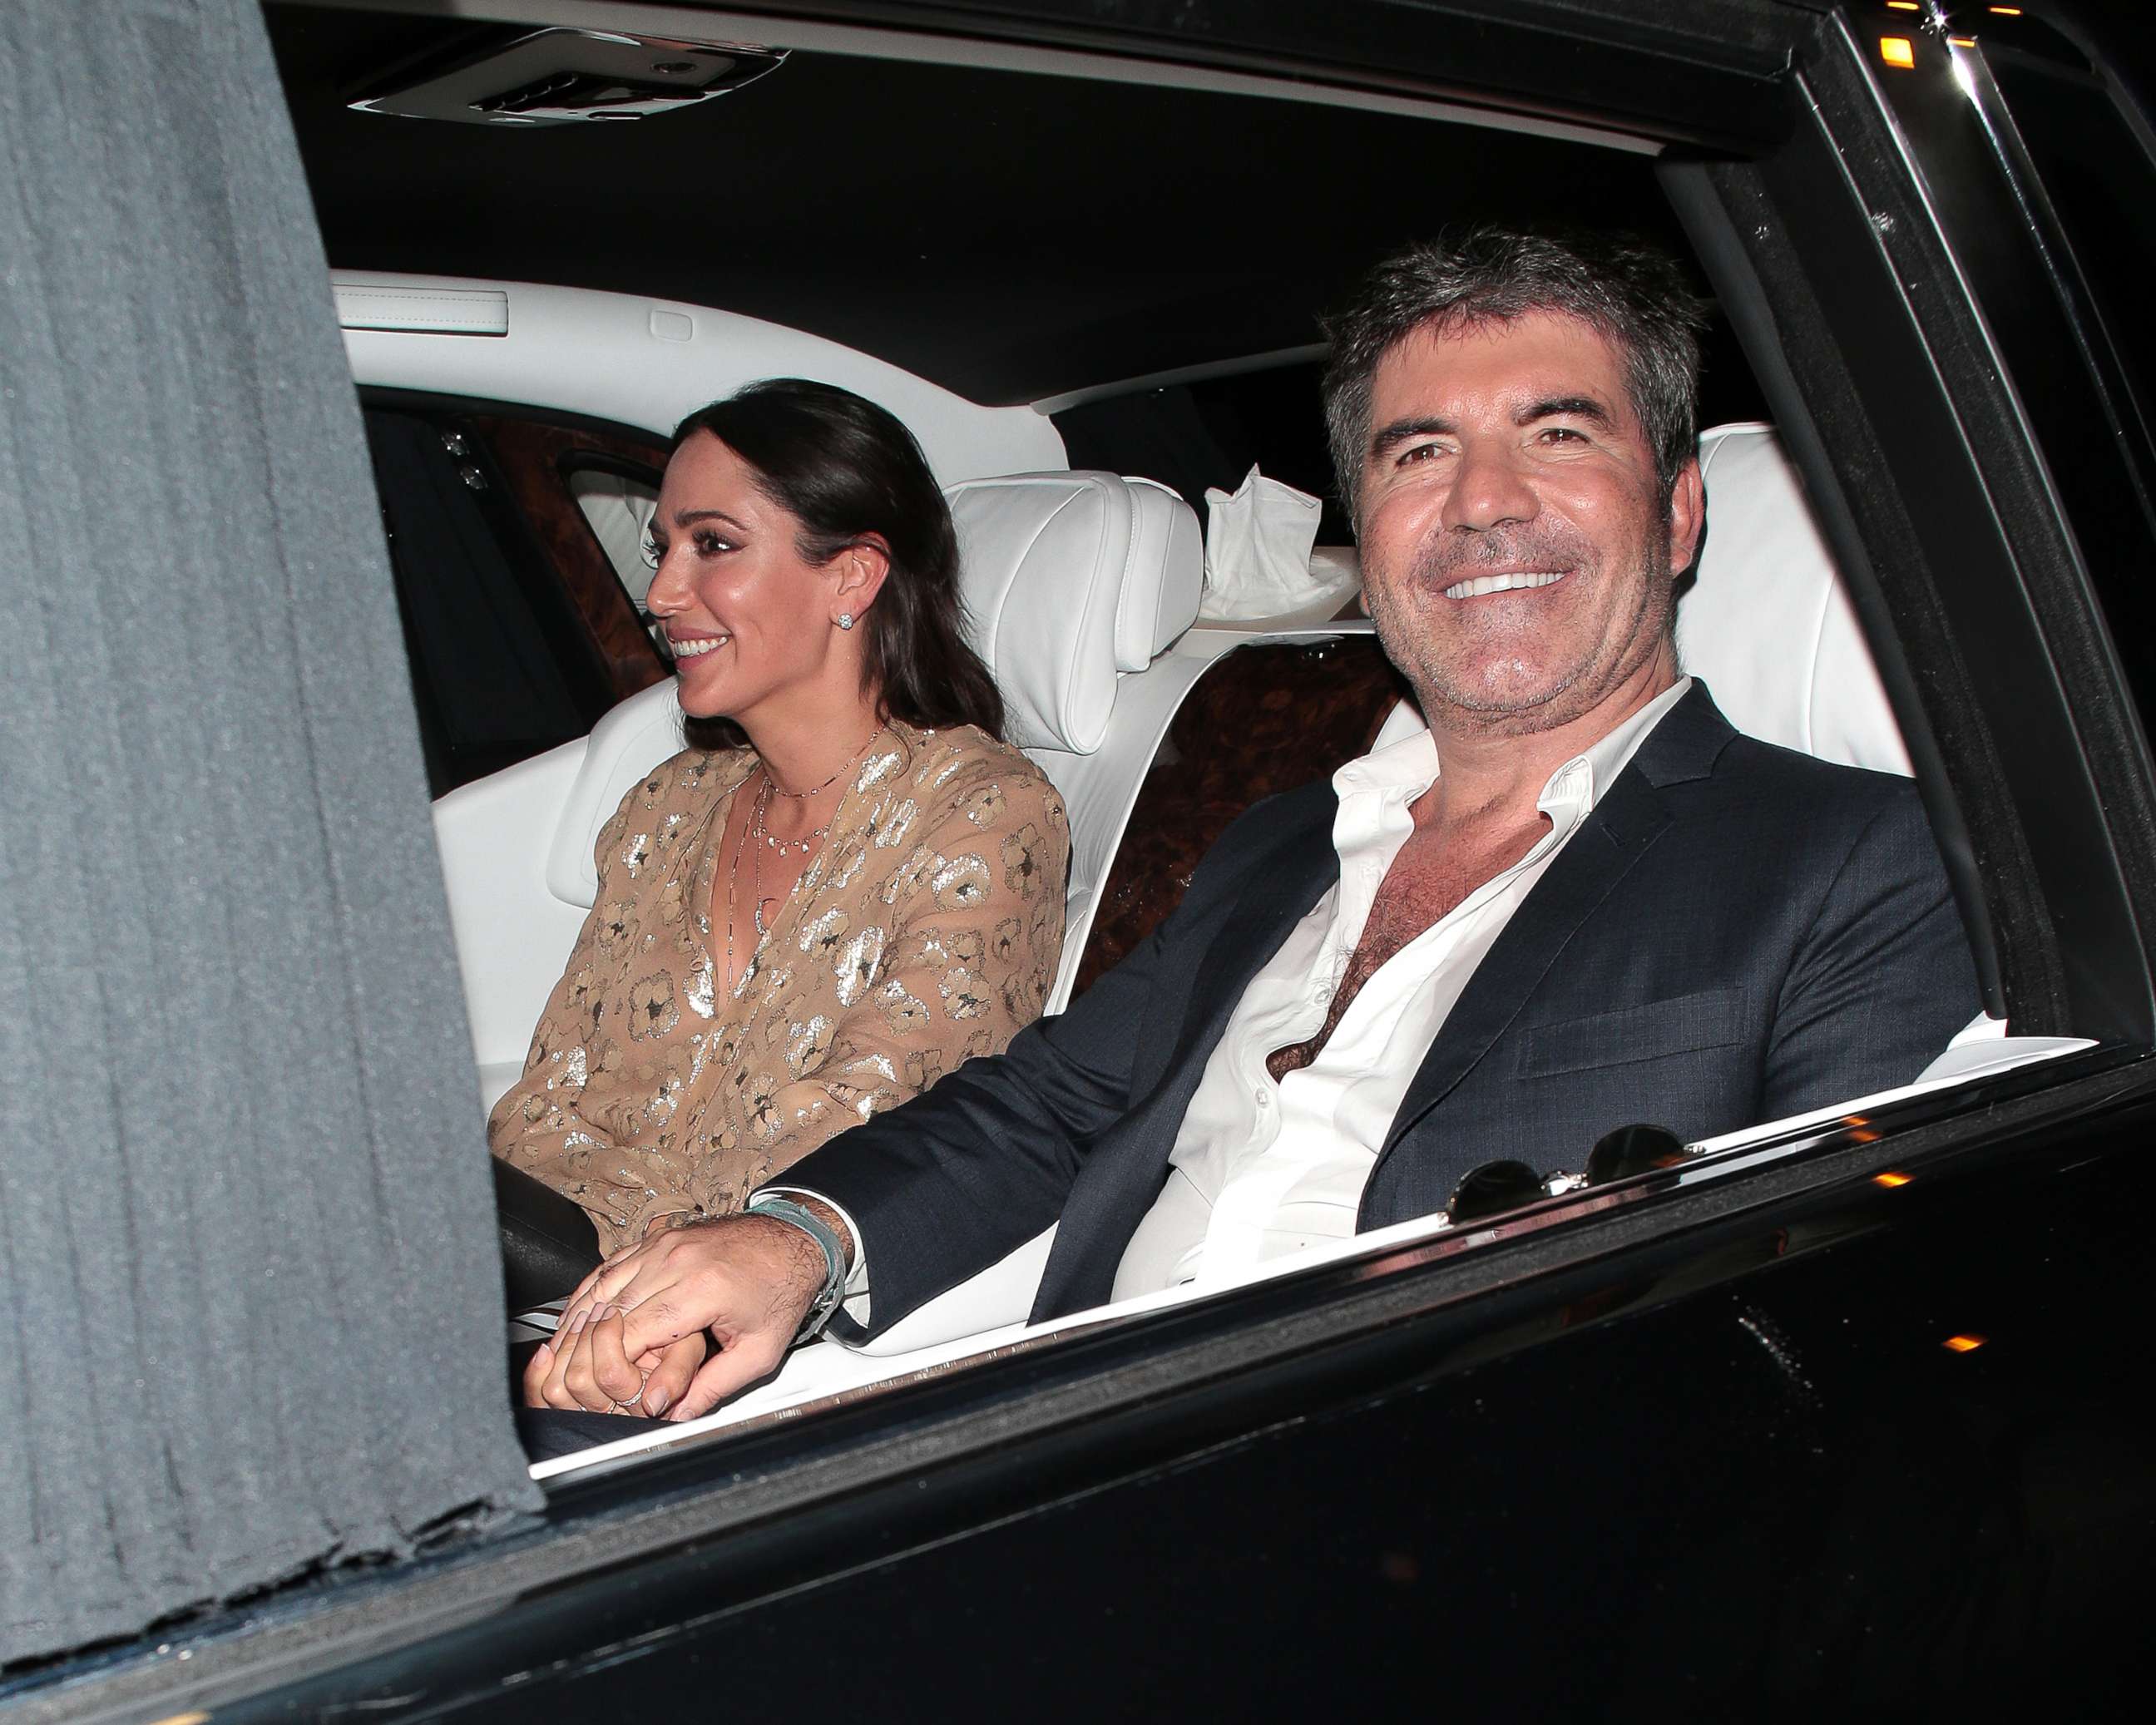 PHOTO: Lauren Silverman and Simon Cowell seen leaving Hammersmith Apollo after Britain's Got Talent - semi final day 3, May 30, 2018 in London, England. 